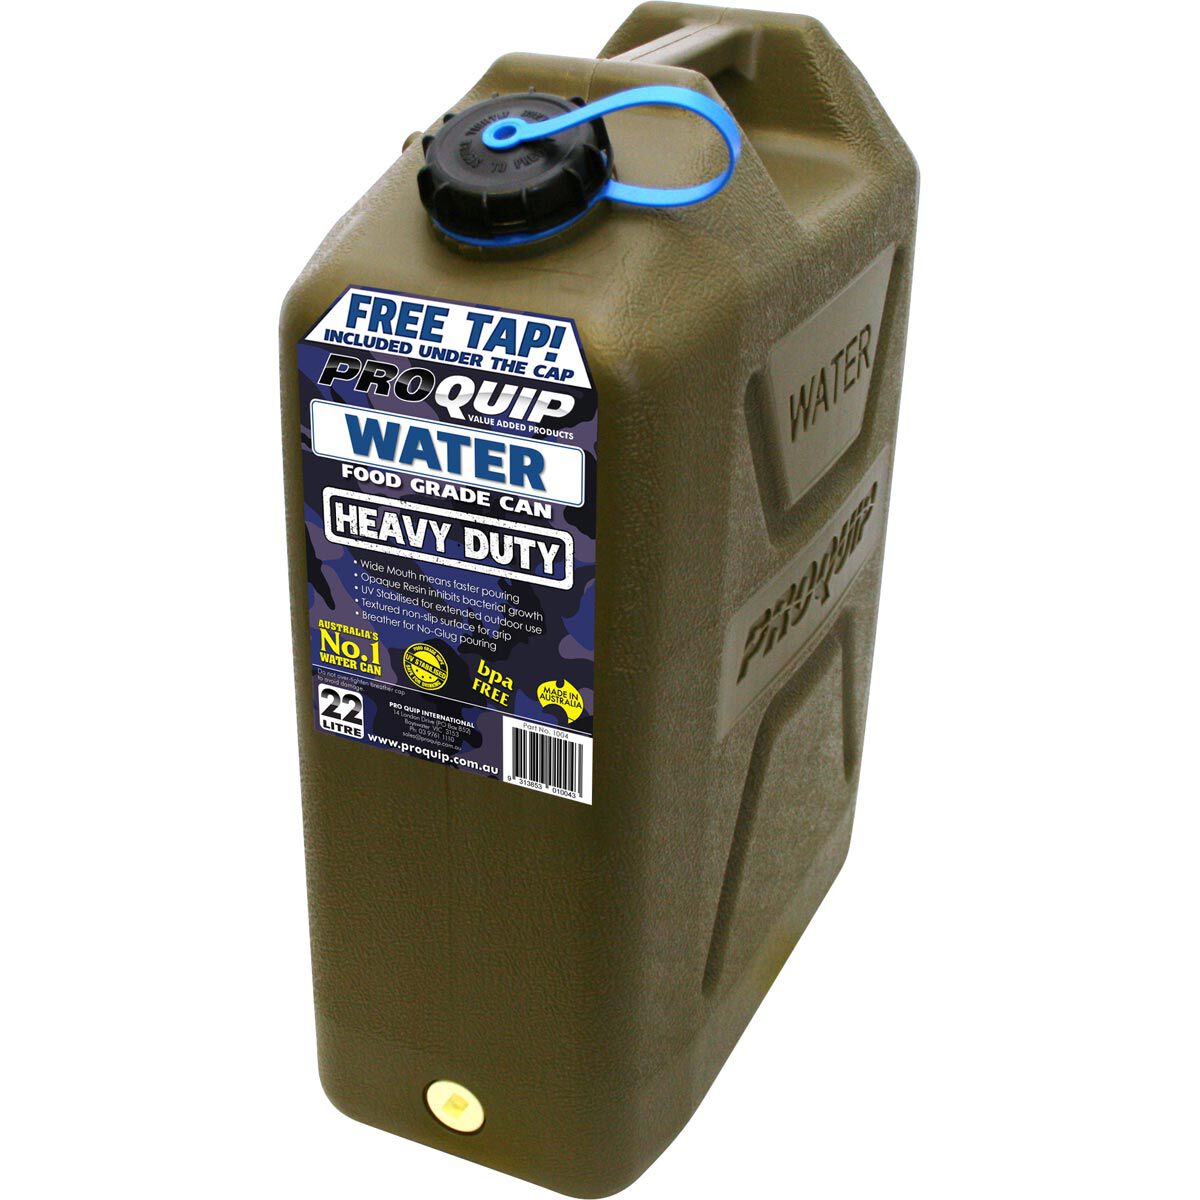 Pro Quip Water Carry Can - 22 Litre, Green, , scaau_hi-res